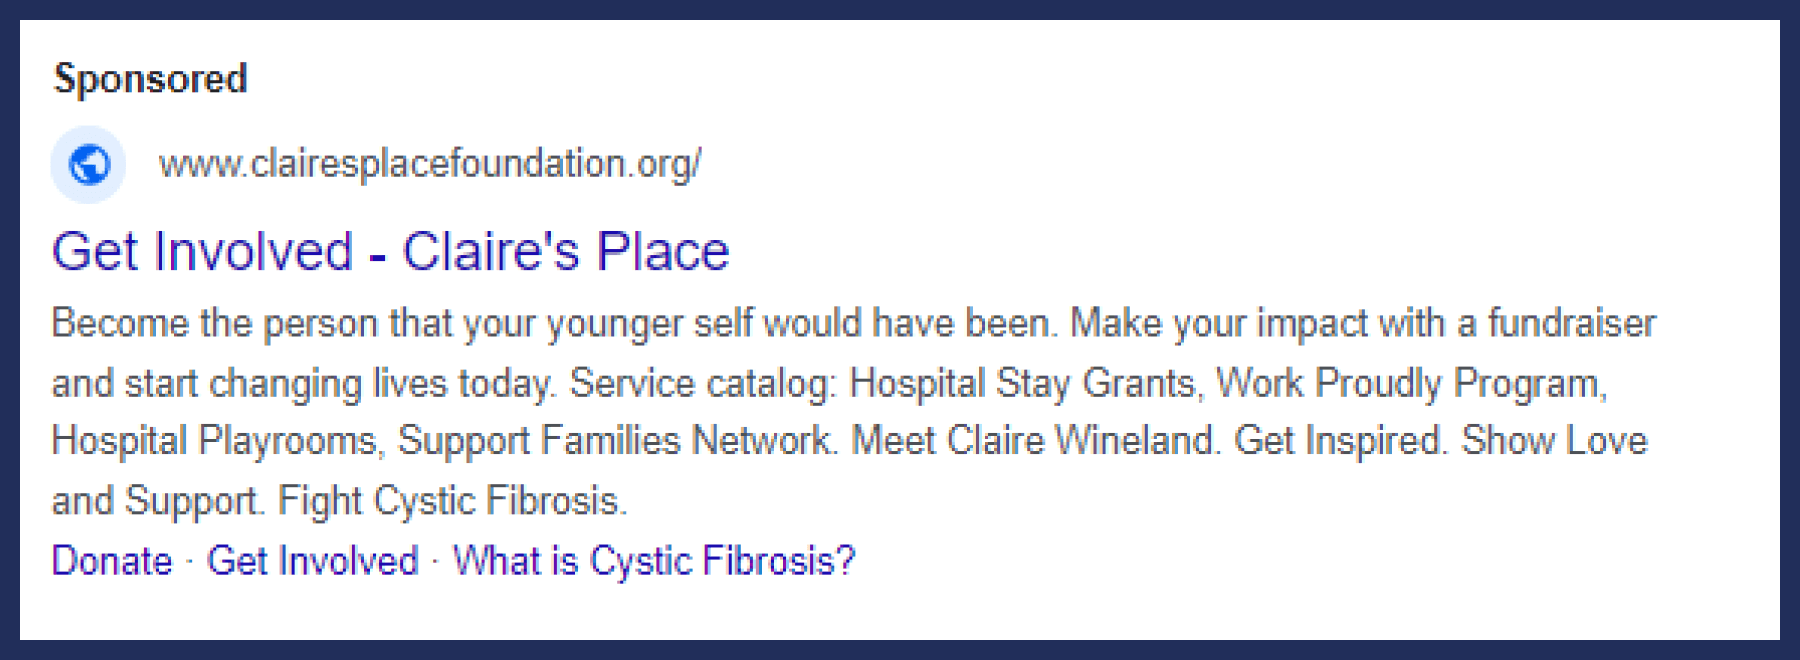 A Google Ad from Claire's Place Foundation that promotes different involvement opportunities